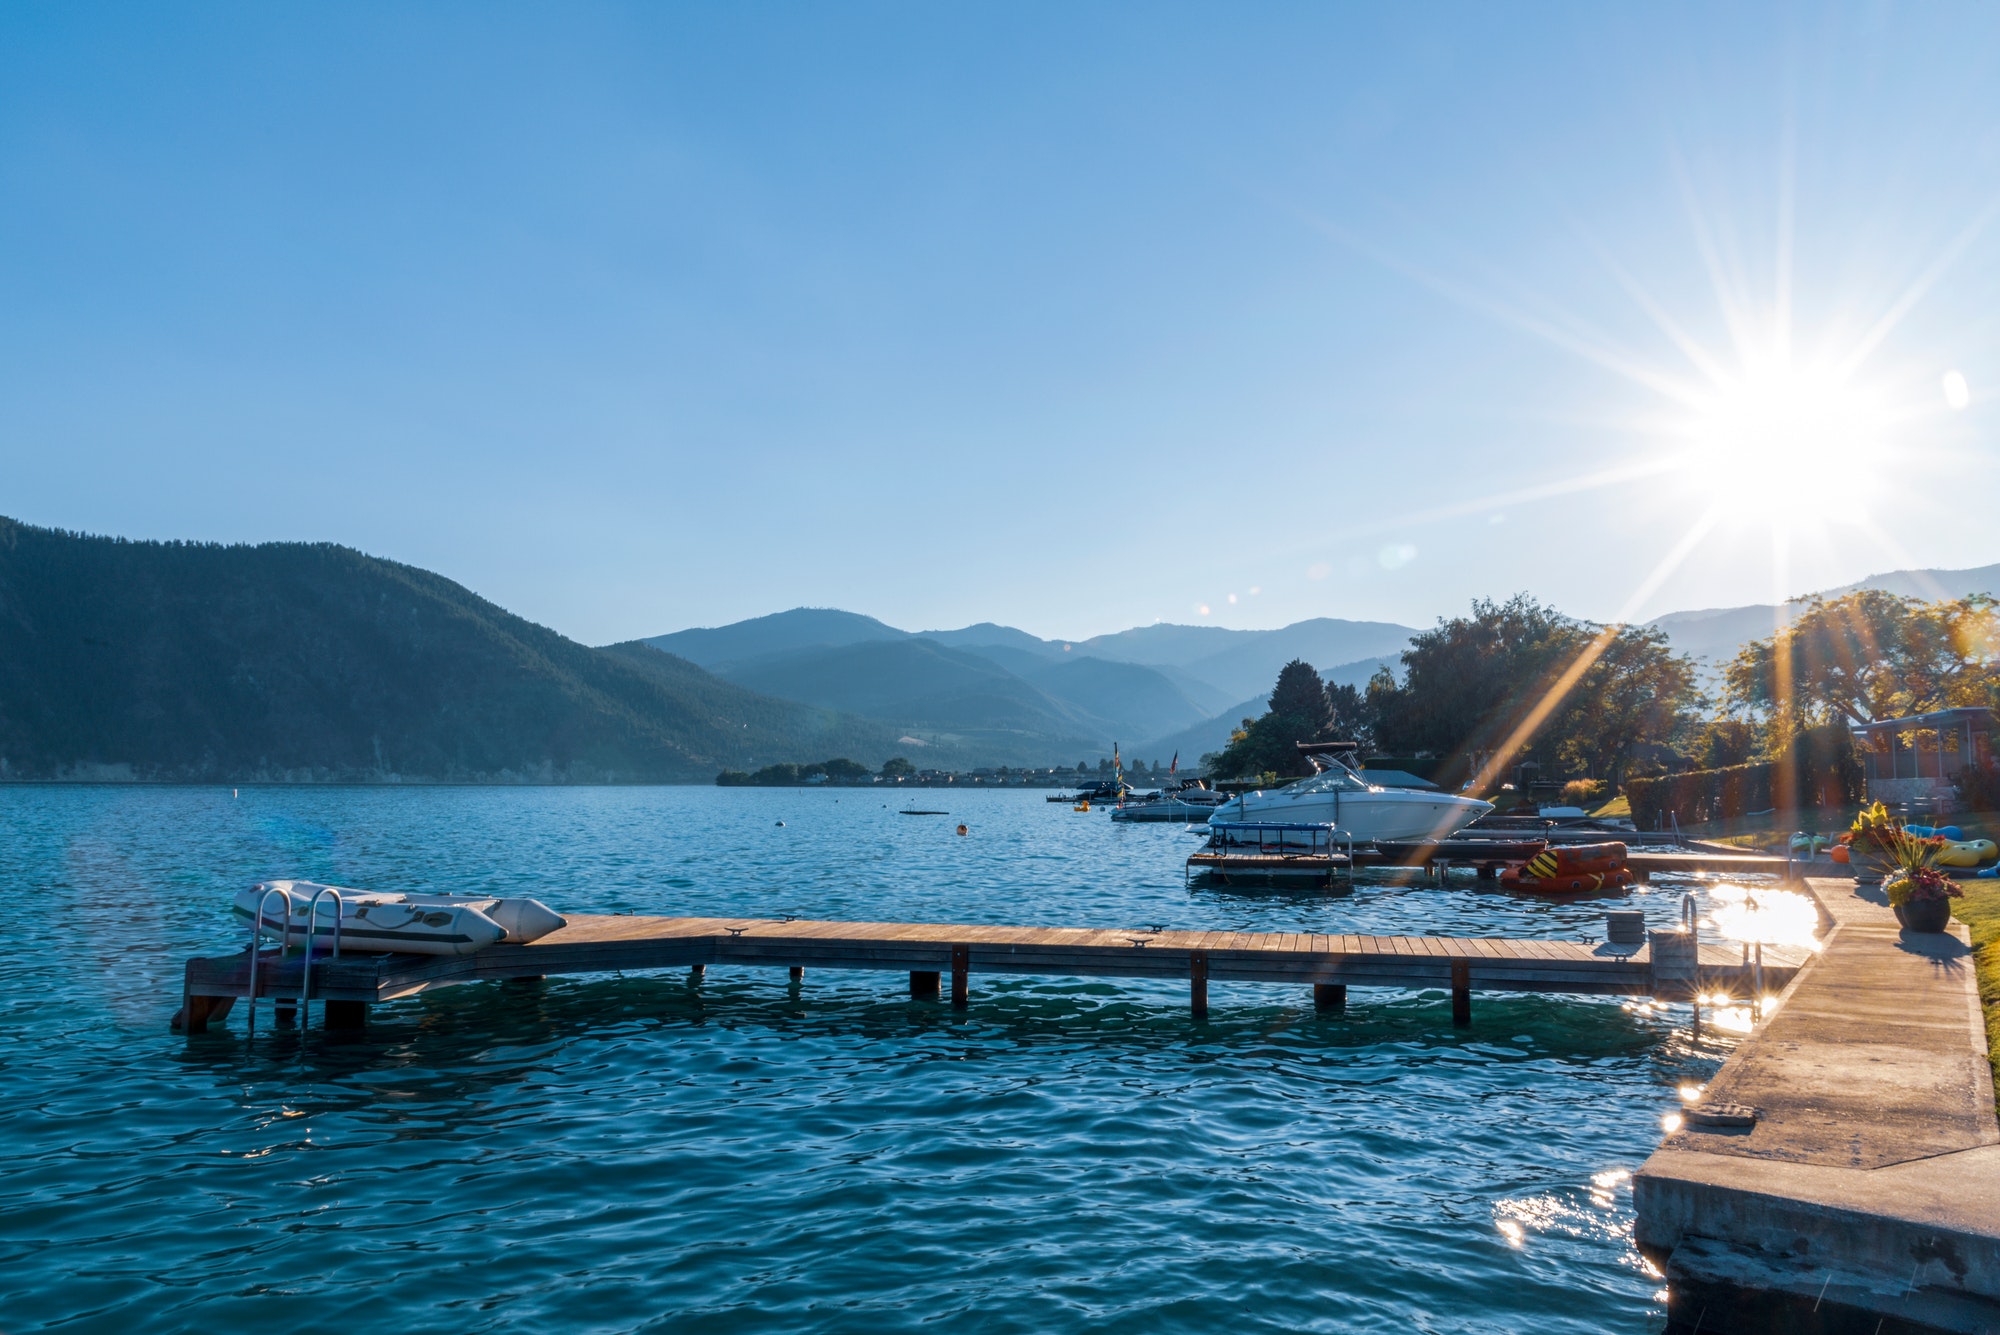 Lake shore boat dock with small inflatable dingy raft late day sunburst sunshine over mountains.